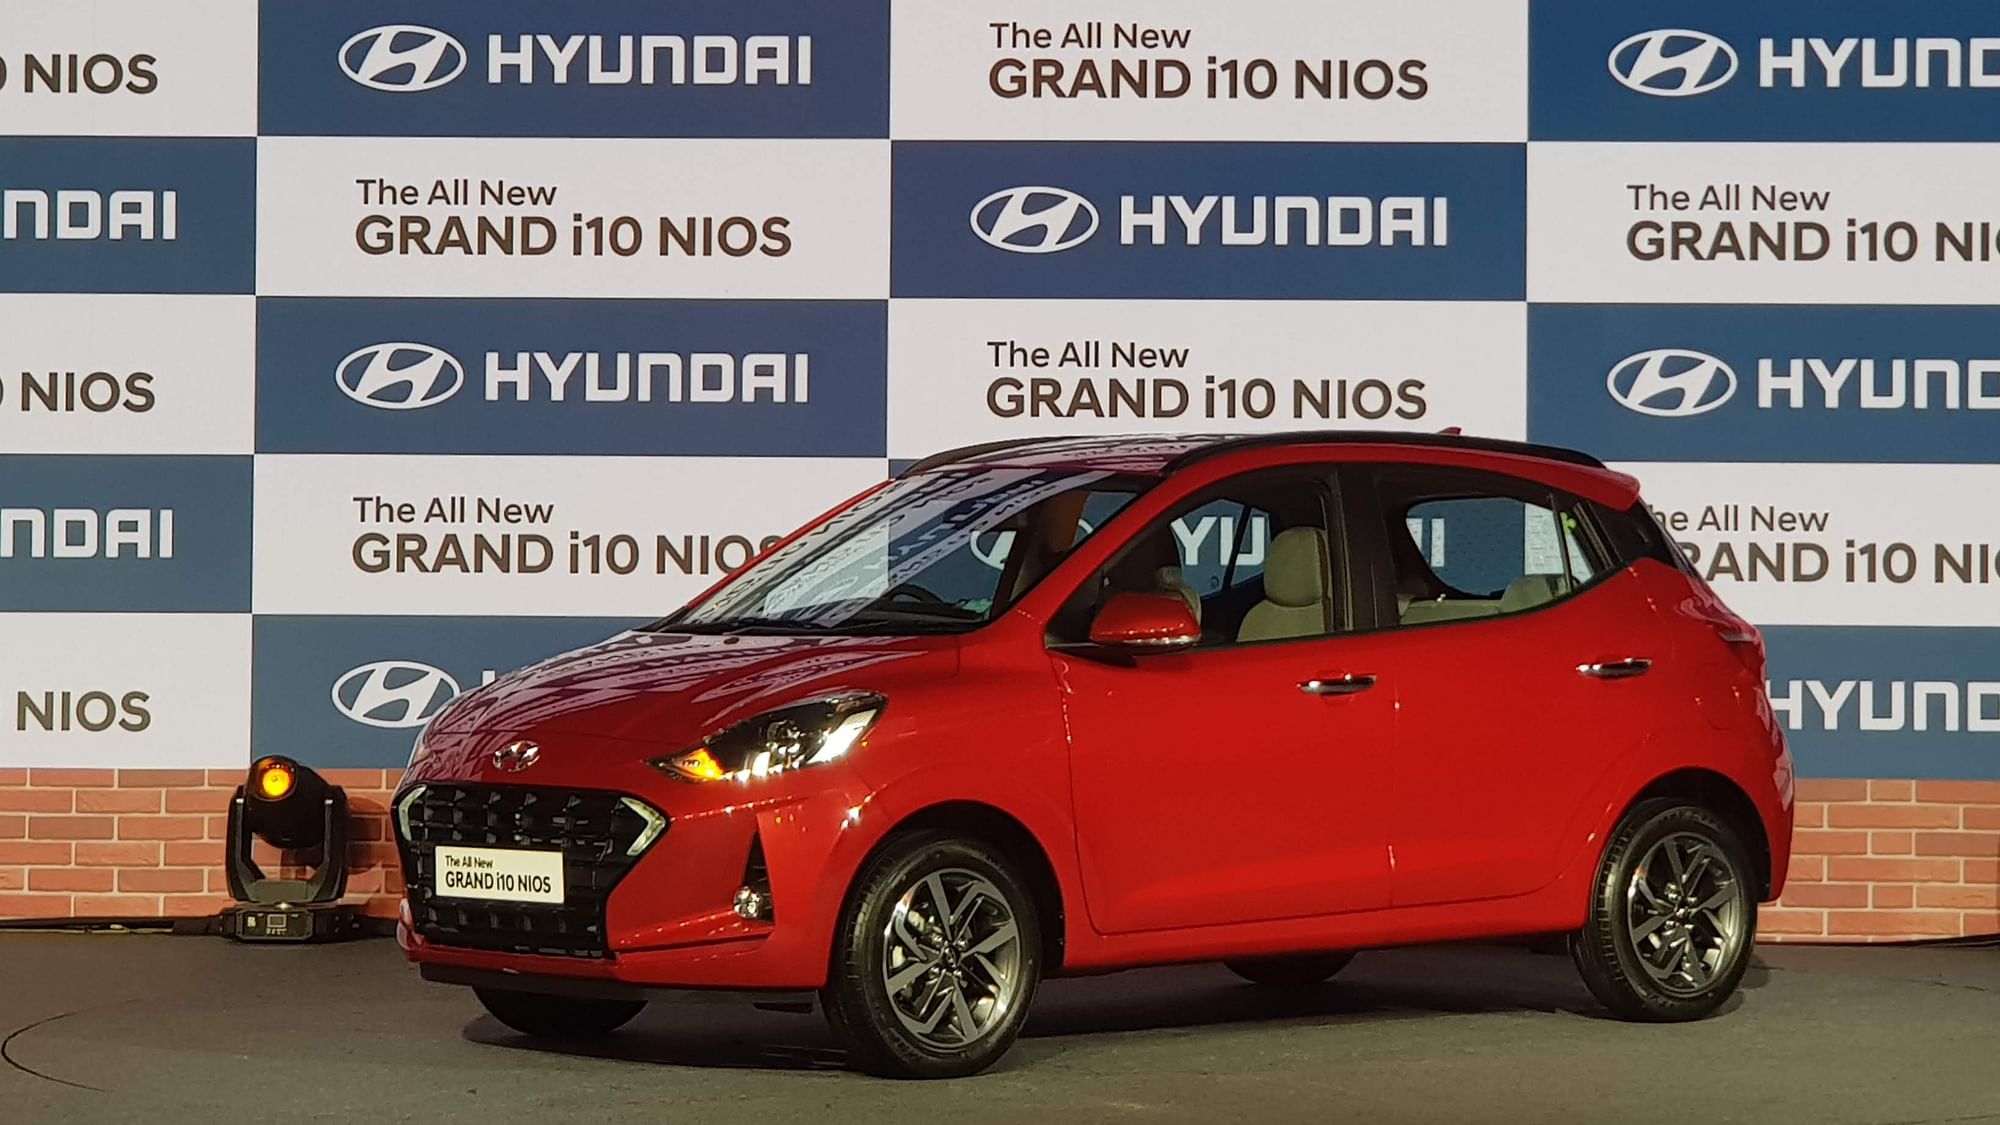 Hyundai Grand i10 Nios is a premium version of the regular Grand i10, that will sell alongside the older car.